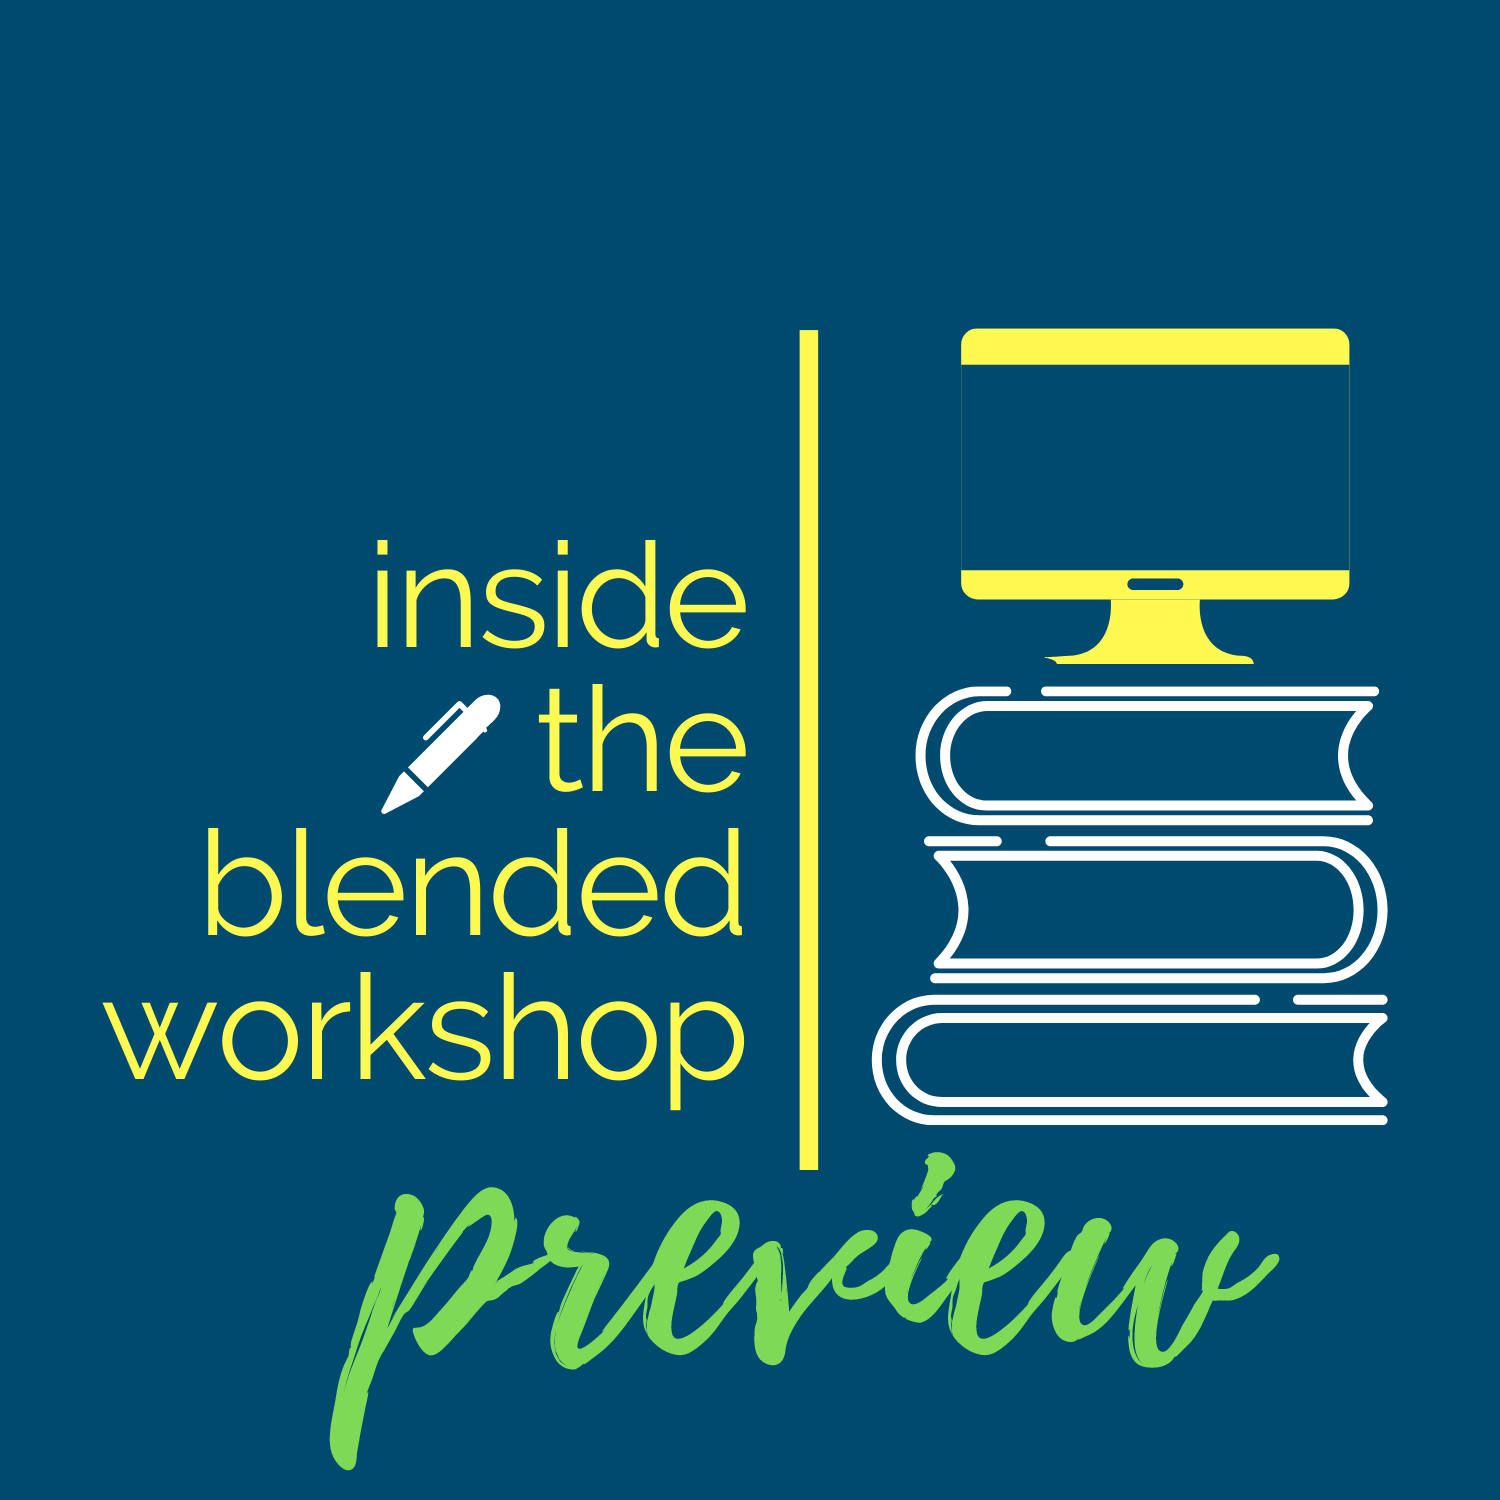 Sneak A Peek At Issue 02 Of Inside The Blended Workshop